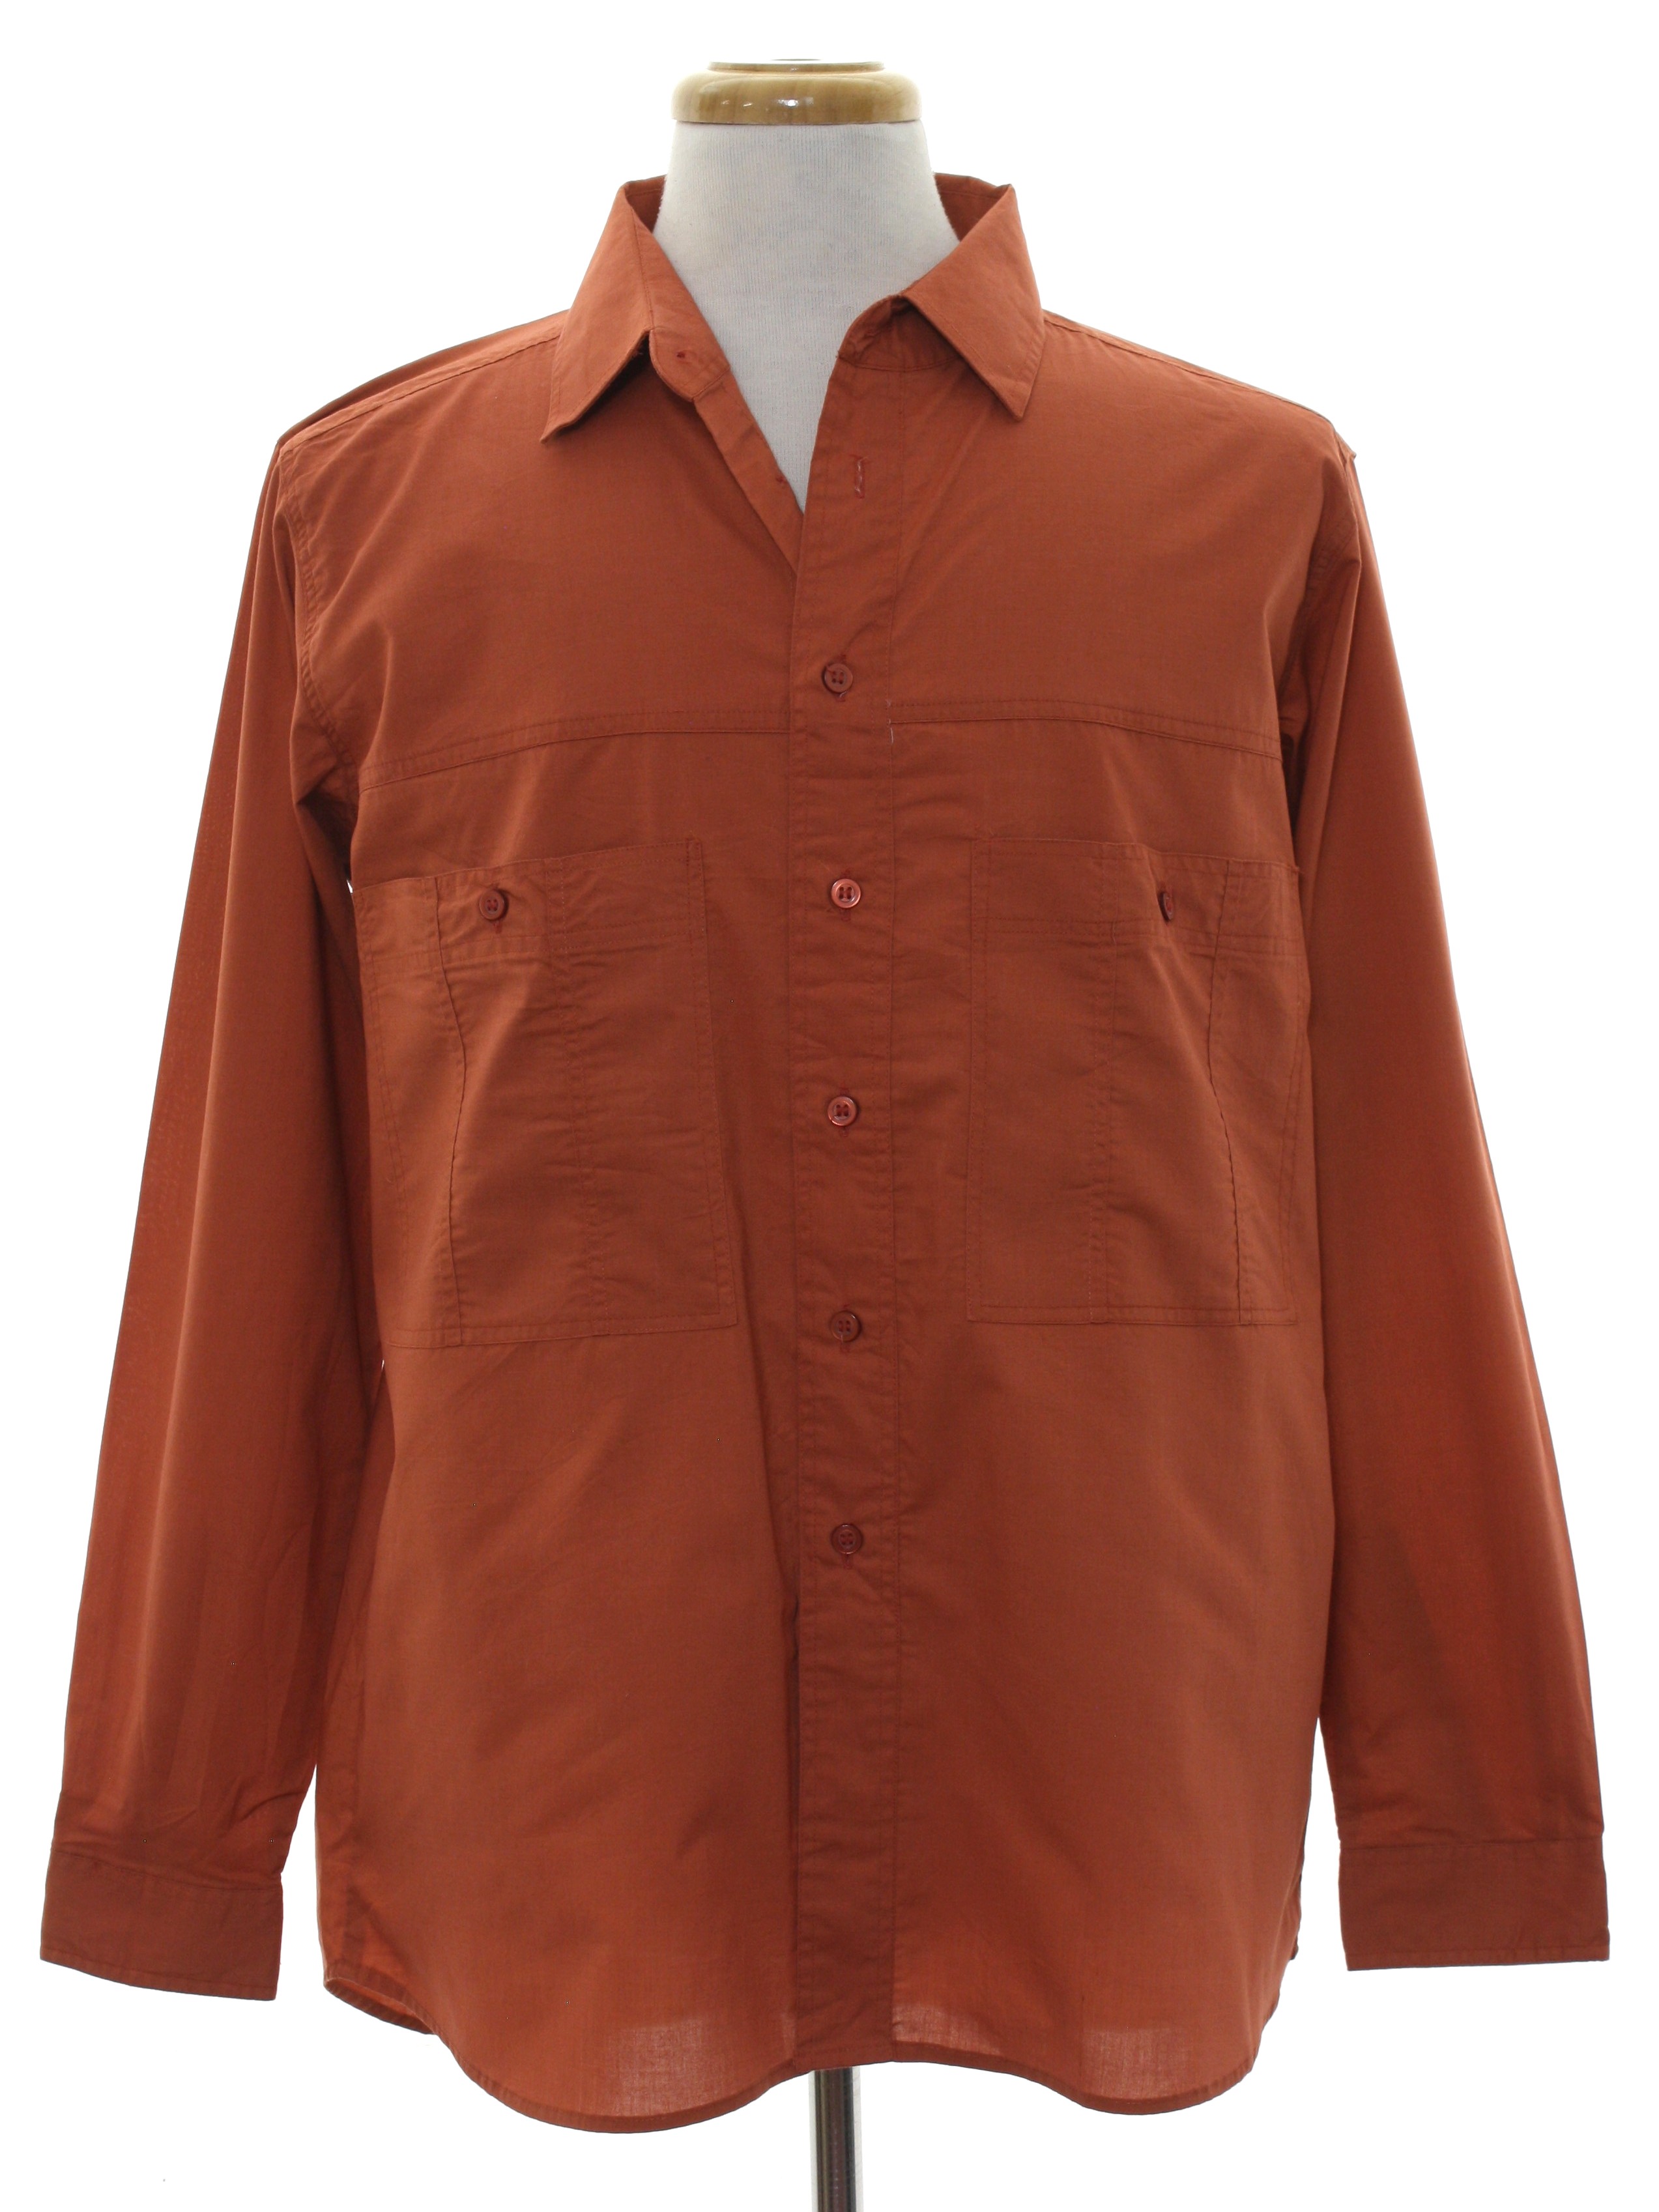 Retro 70's Shirt: 80s -Expressions- Mens teracotta tan polyester cotton ...